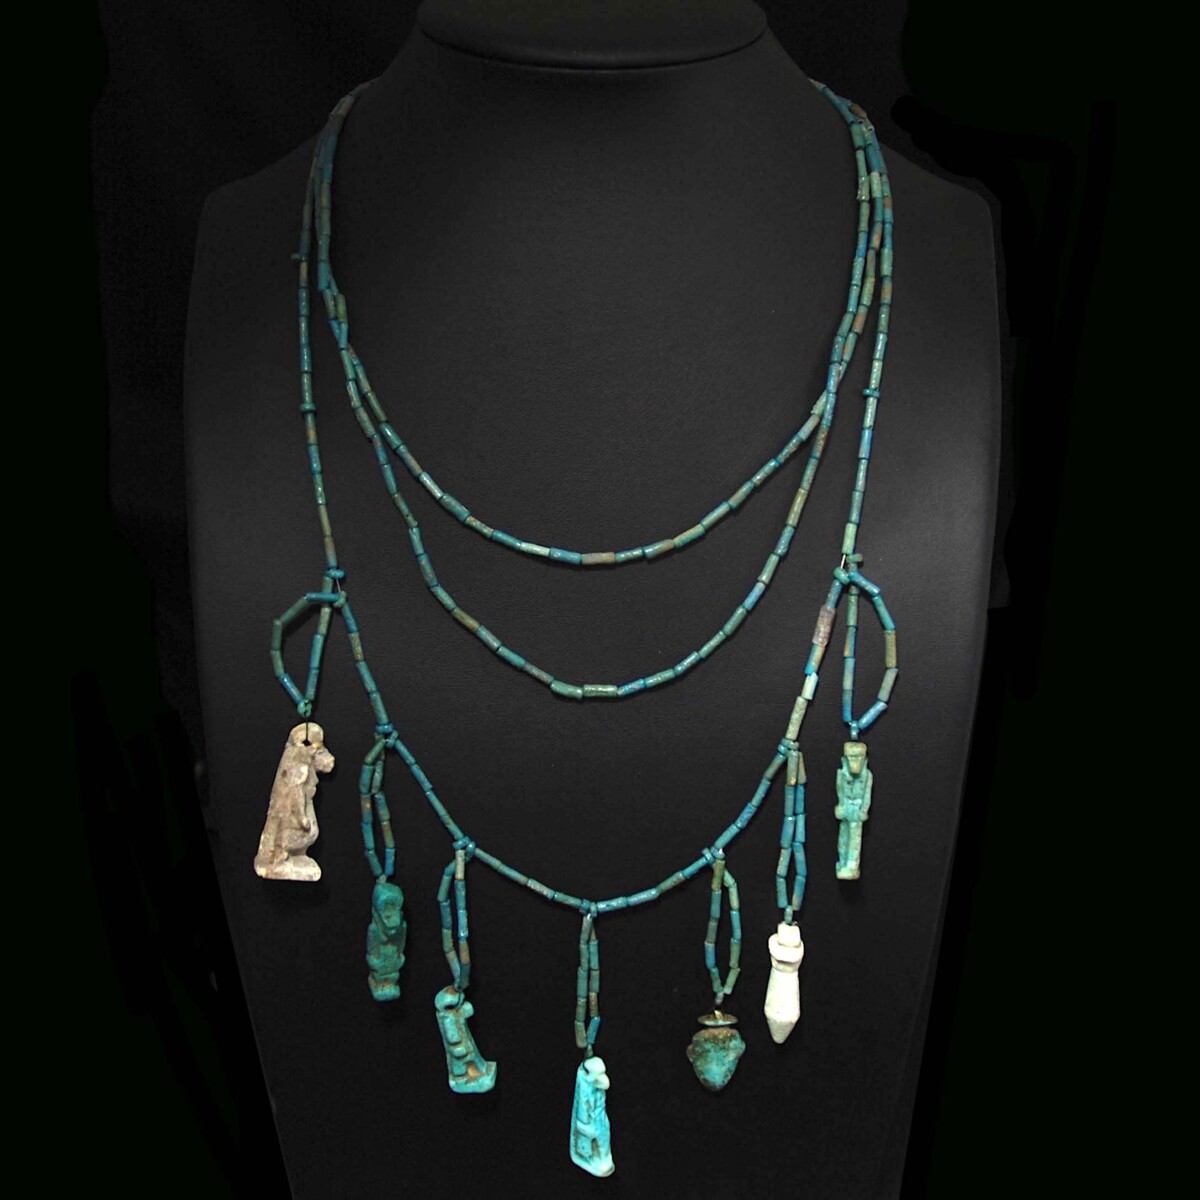 Egyptian fayence necklace with seven amulets